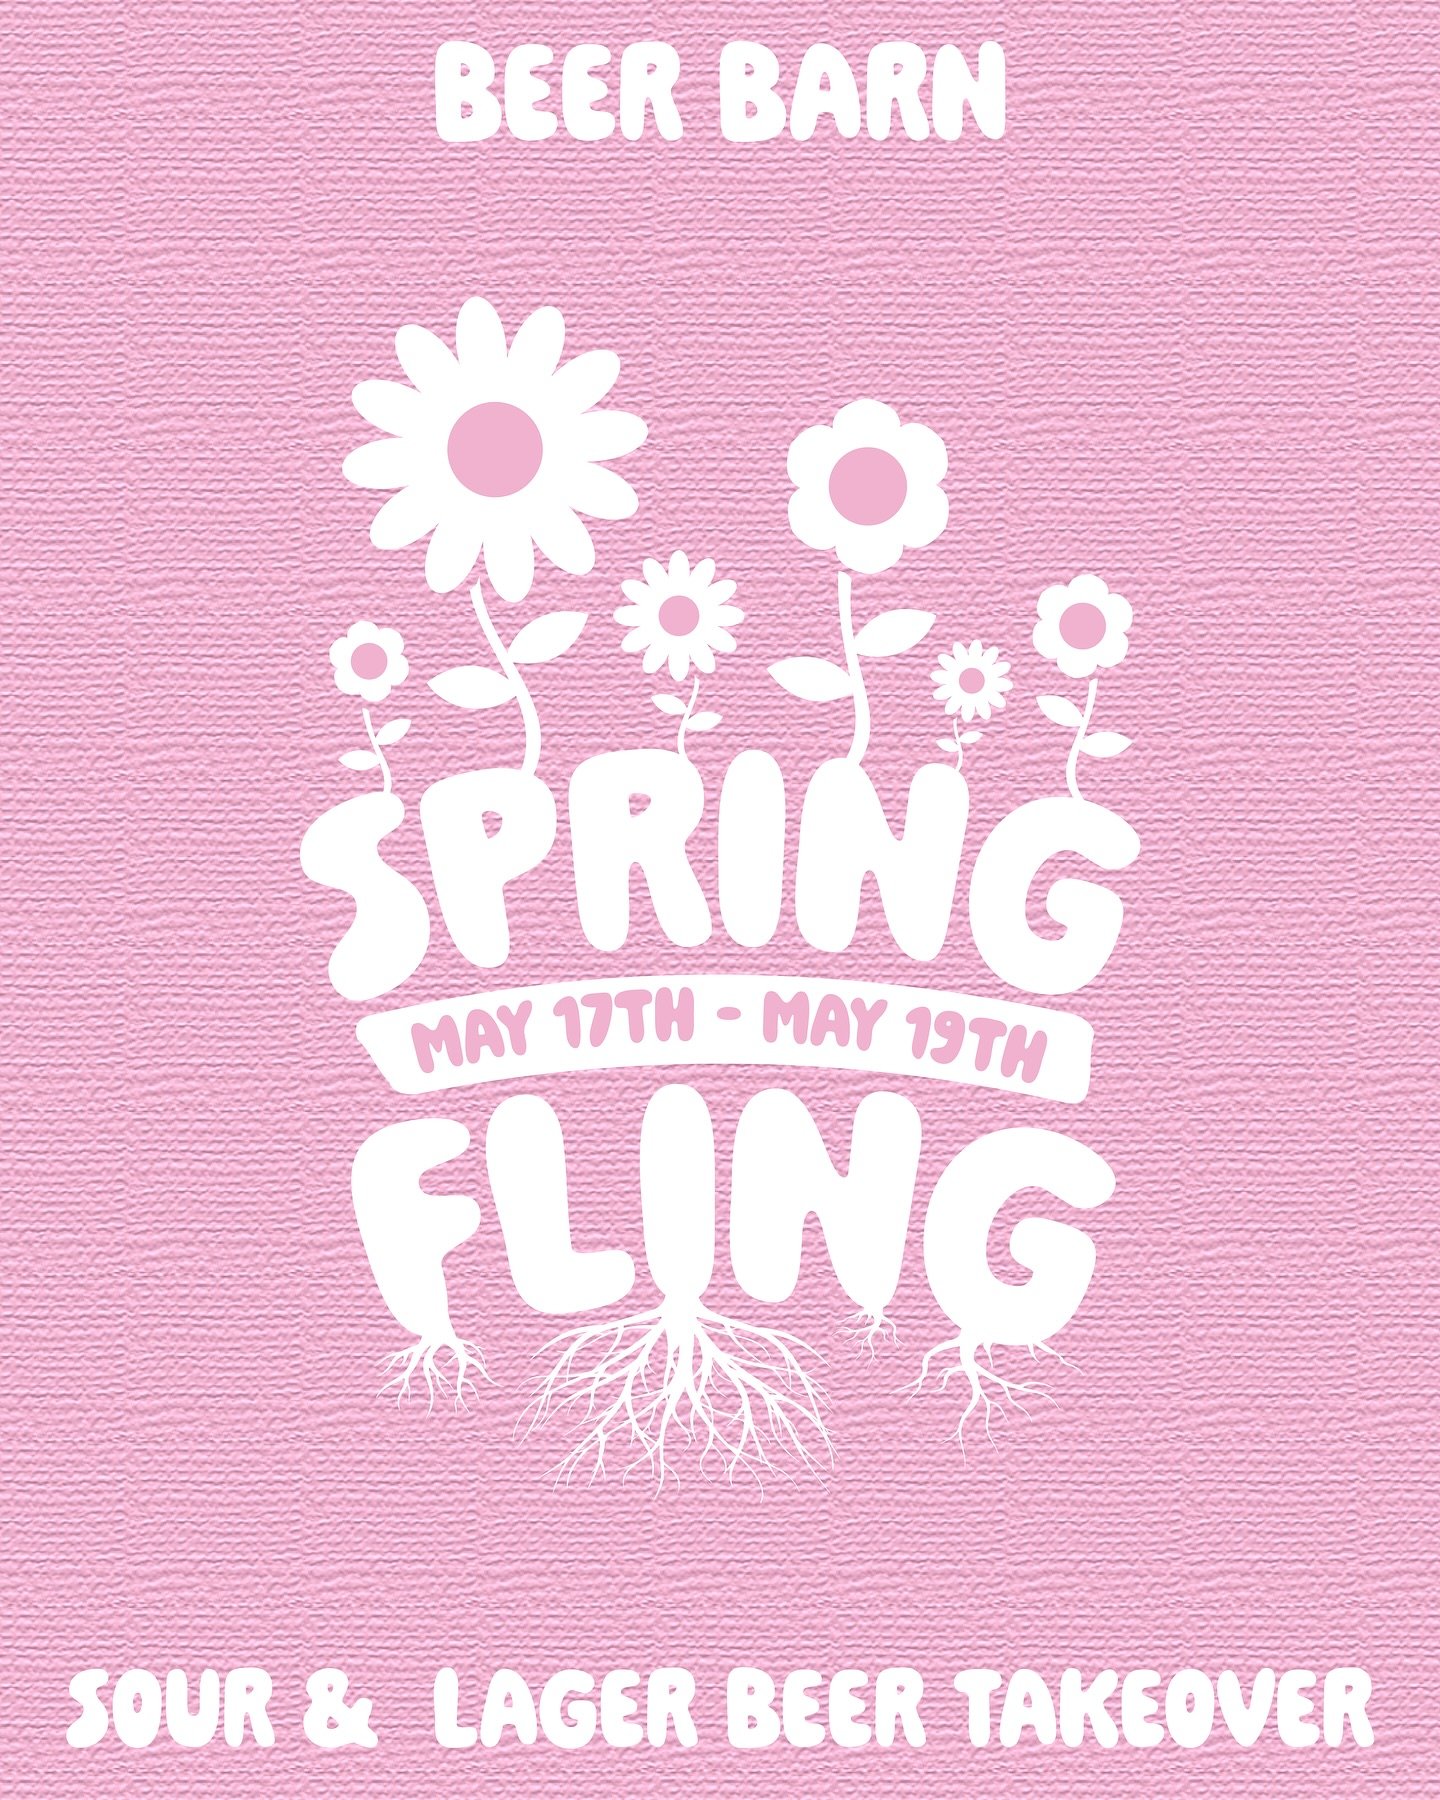 OUR SPRING FLING IS AROUND THE CORNER! 🌻

That&rsquo;s right, it&rsquo;s almost time for our annual Sour &amp; Lager Beer Tap Takeover! We&rsquo;ll have a ton of great options for you to try (draft list coming soon!) Don&rsquo;t worry we&rsquo;ll st